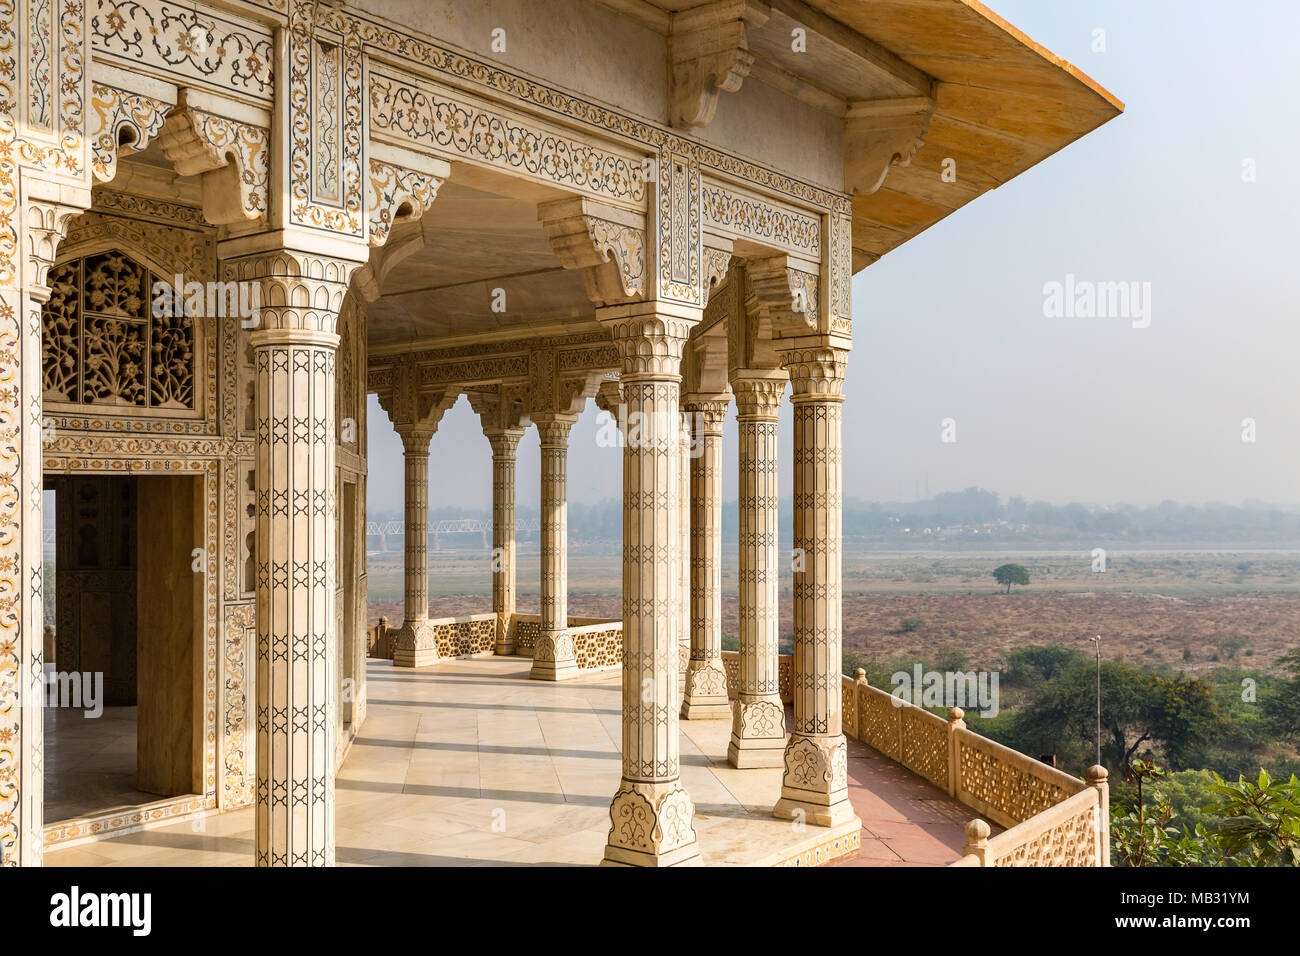 Architectural detail with marquetry inside Agra Fort, Agra, Uttar Pradesh, India Stock Photo